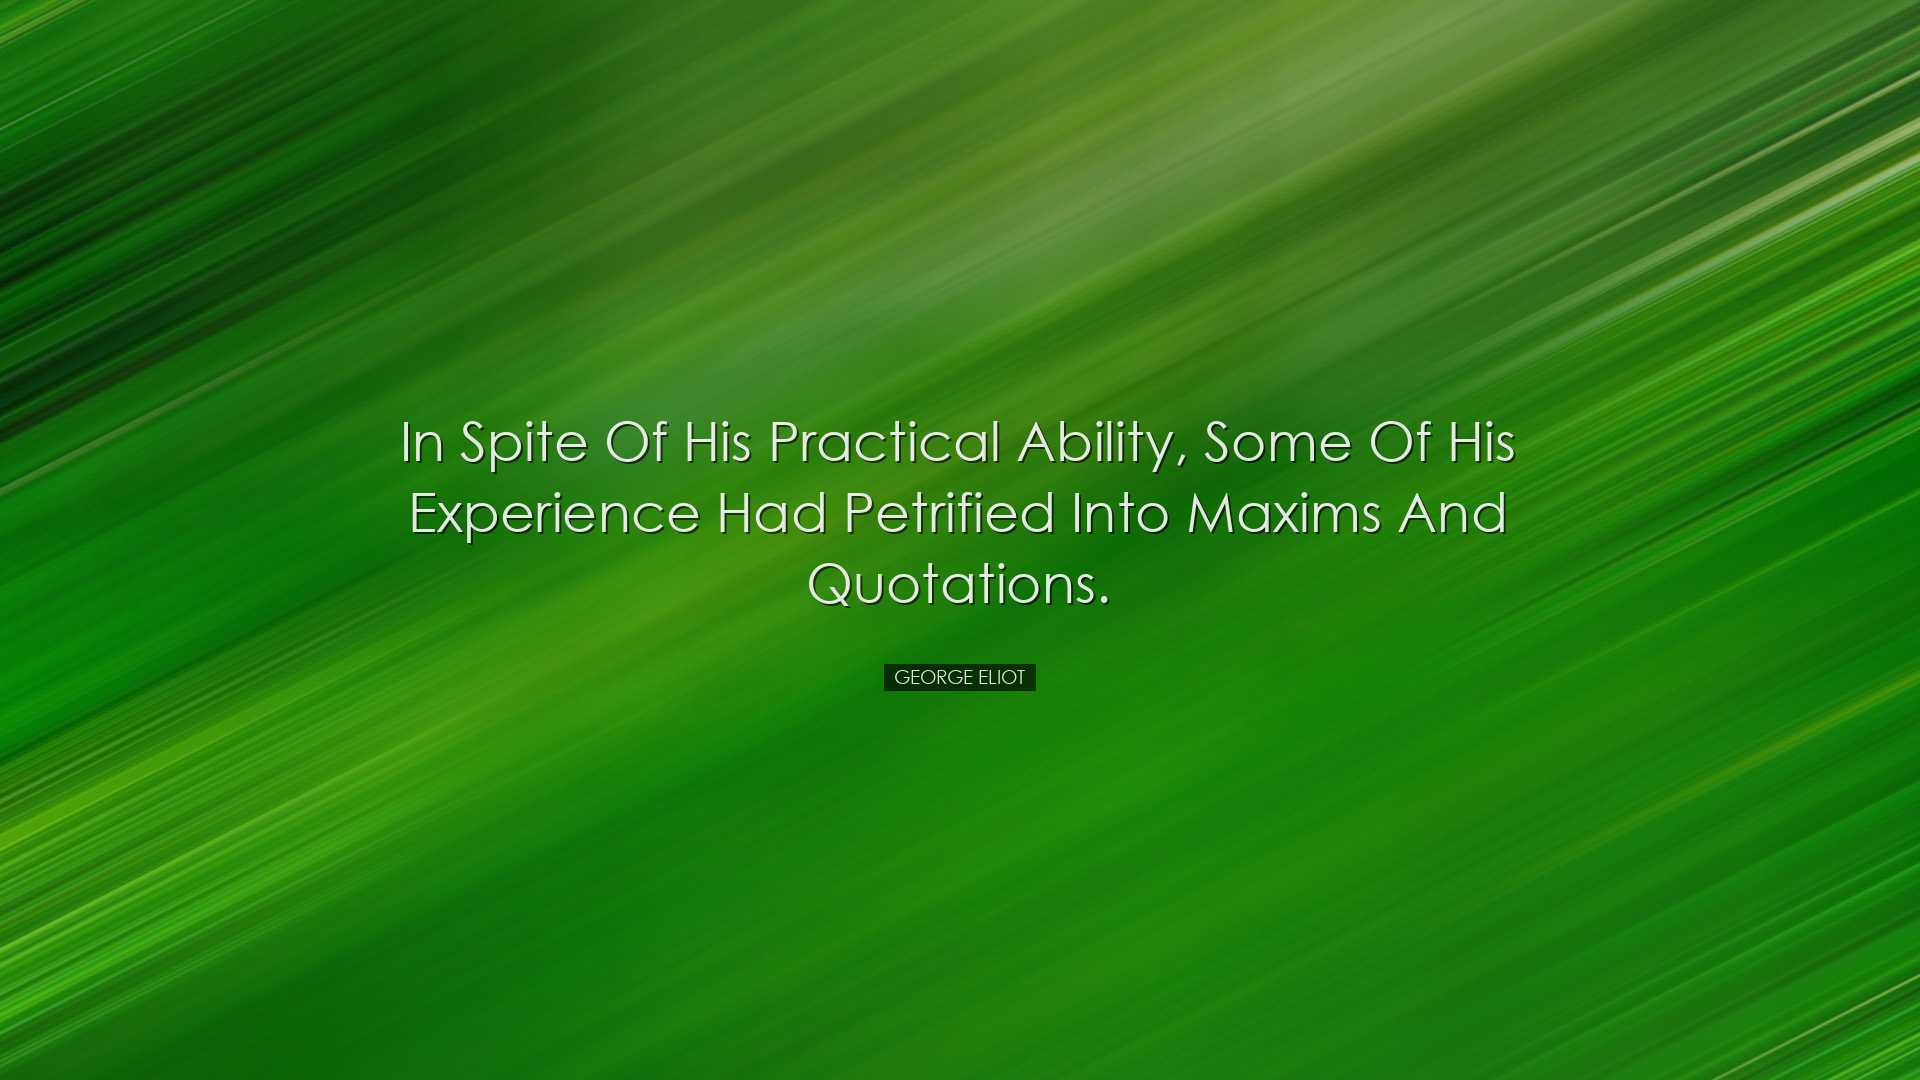 In spite of his practical ability, some of his experience had petr